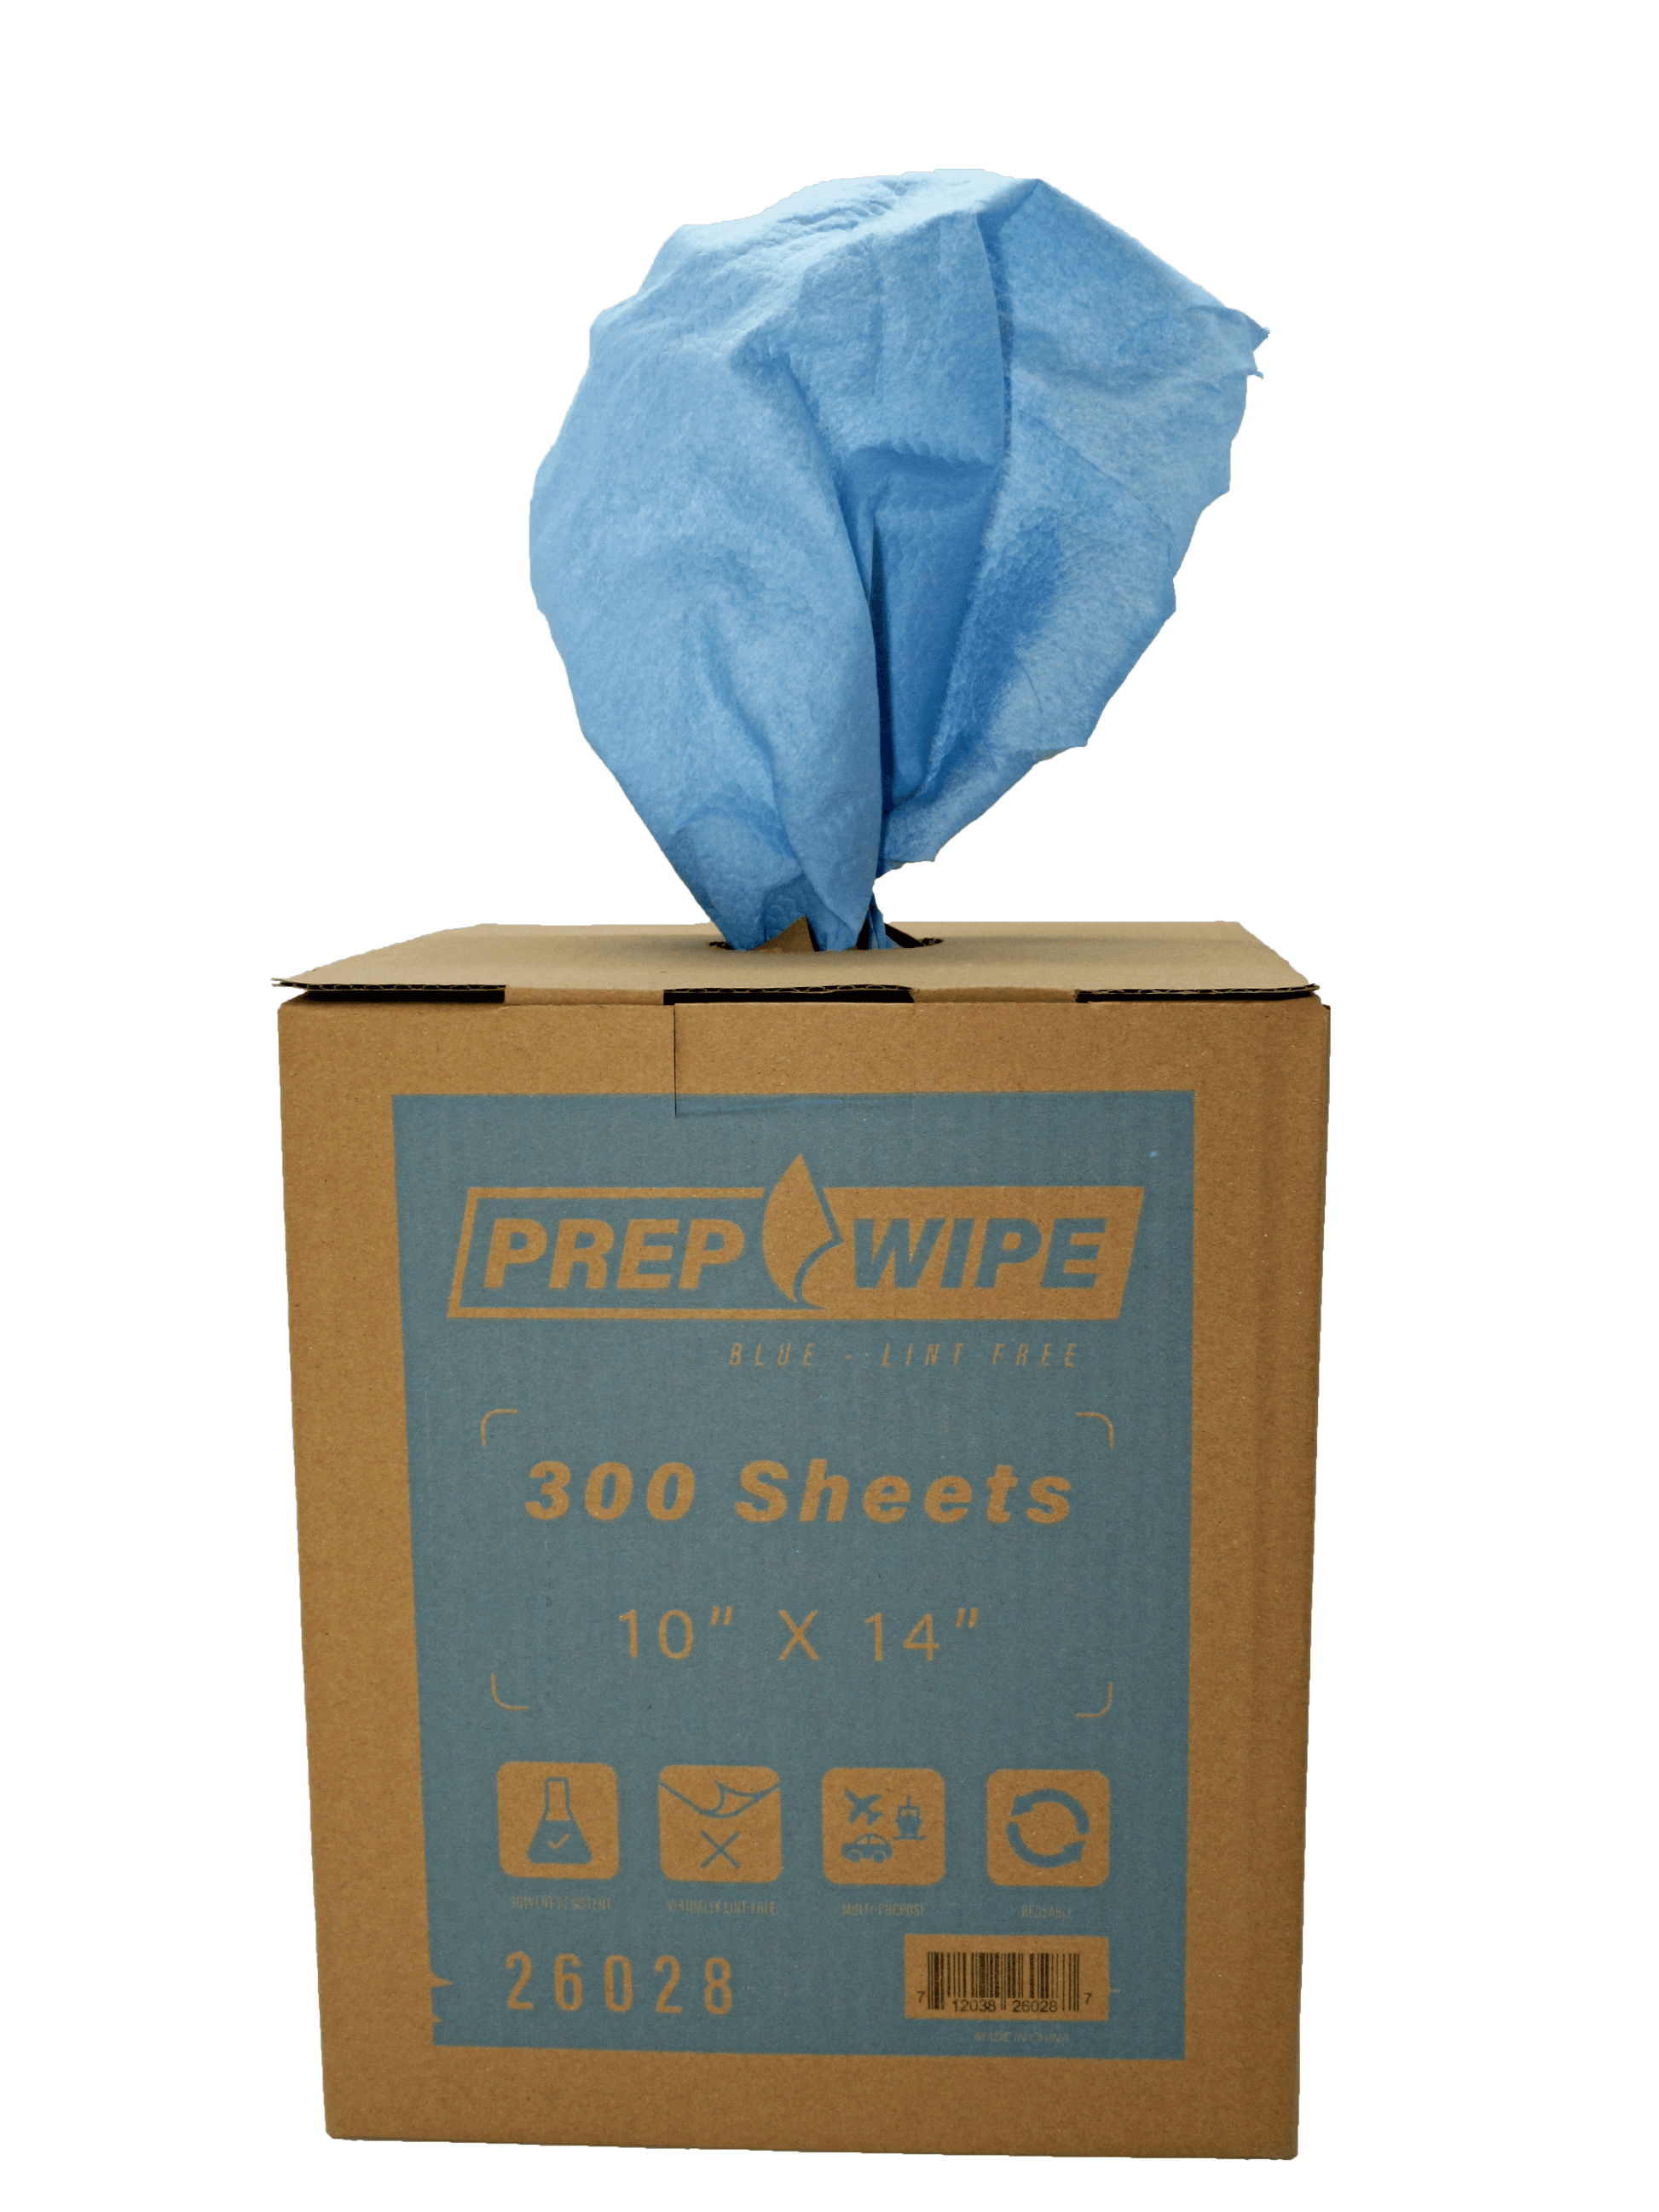 Prep Wipe Lint Free Cleaning Towels Pack of 100 Sheets 9 x 17 (white)